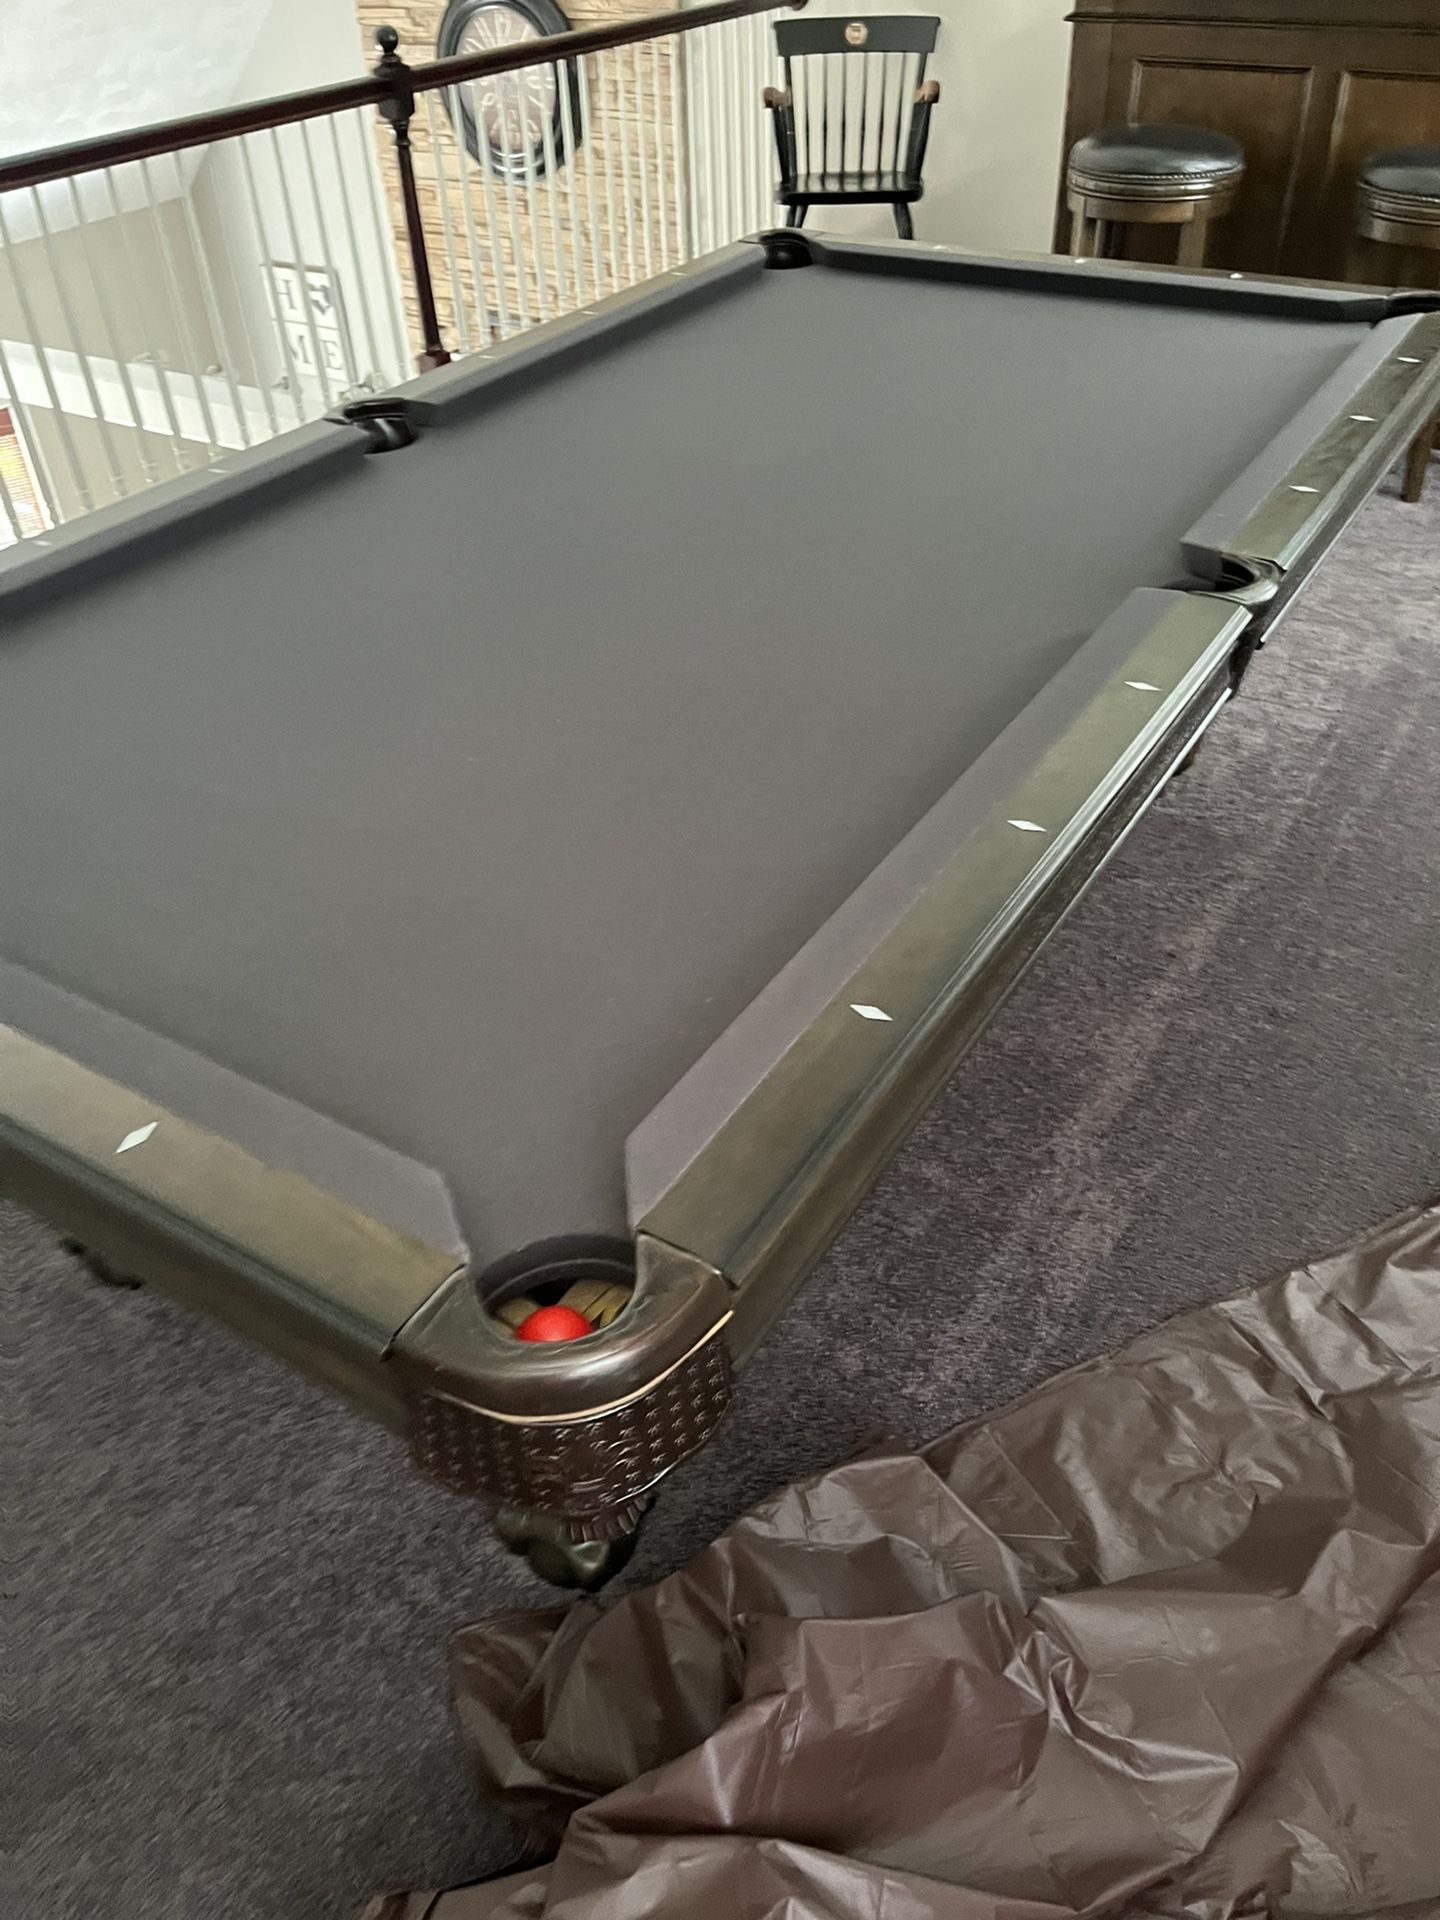 Pool Table And Everything You See Listed  Selling It All For 6,000 